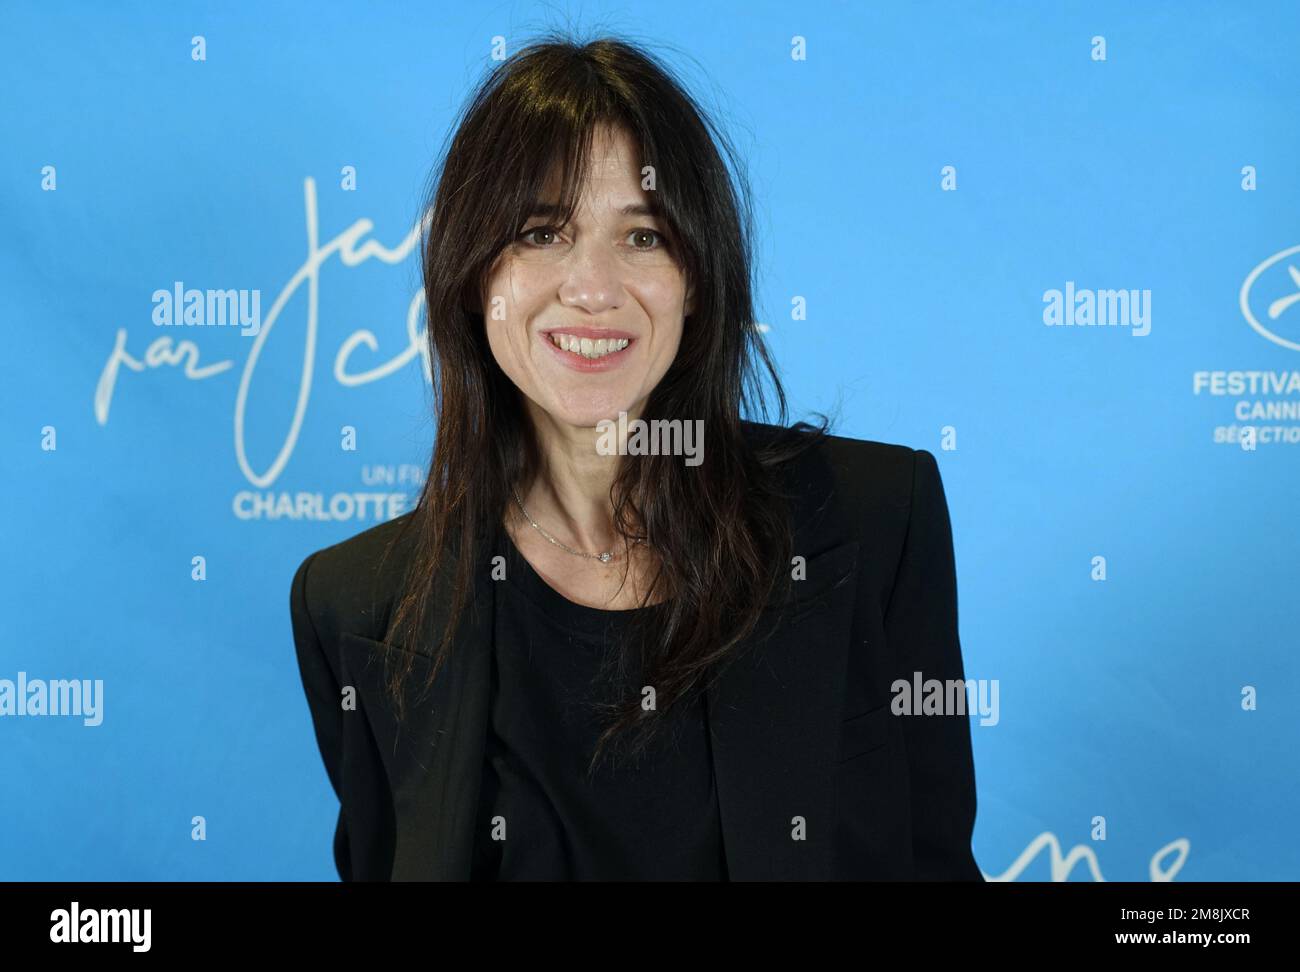 Charlotte Gainsbourg at a film premiere.Montreal,Quebec,Canada. Stock Photo